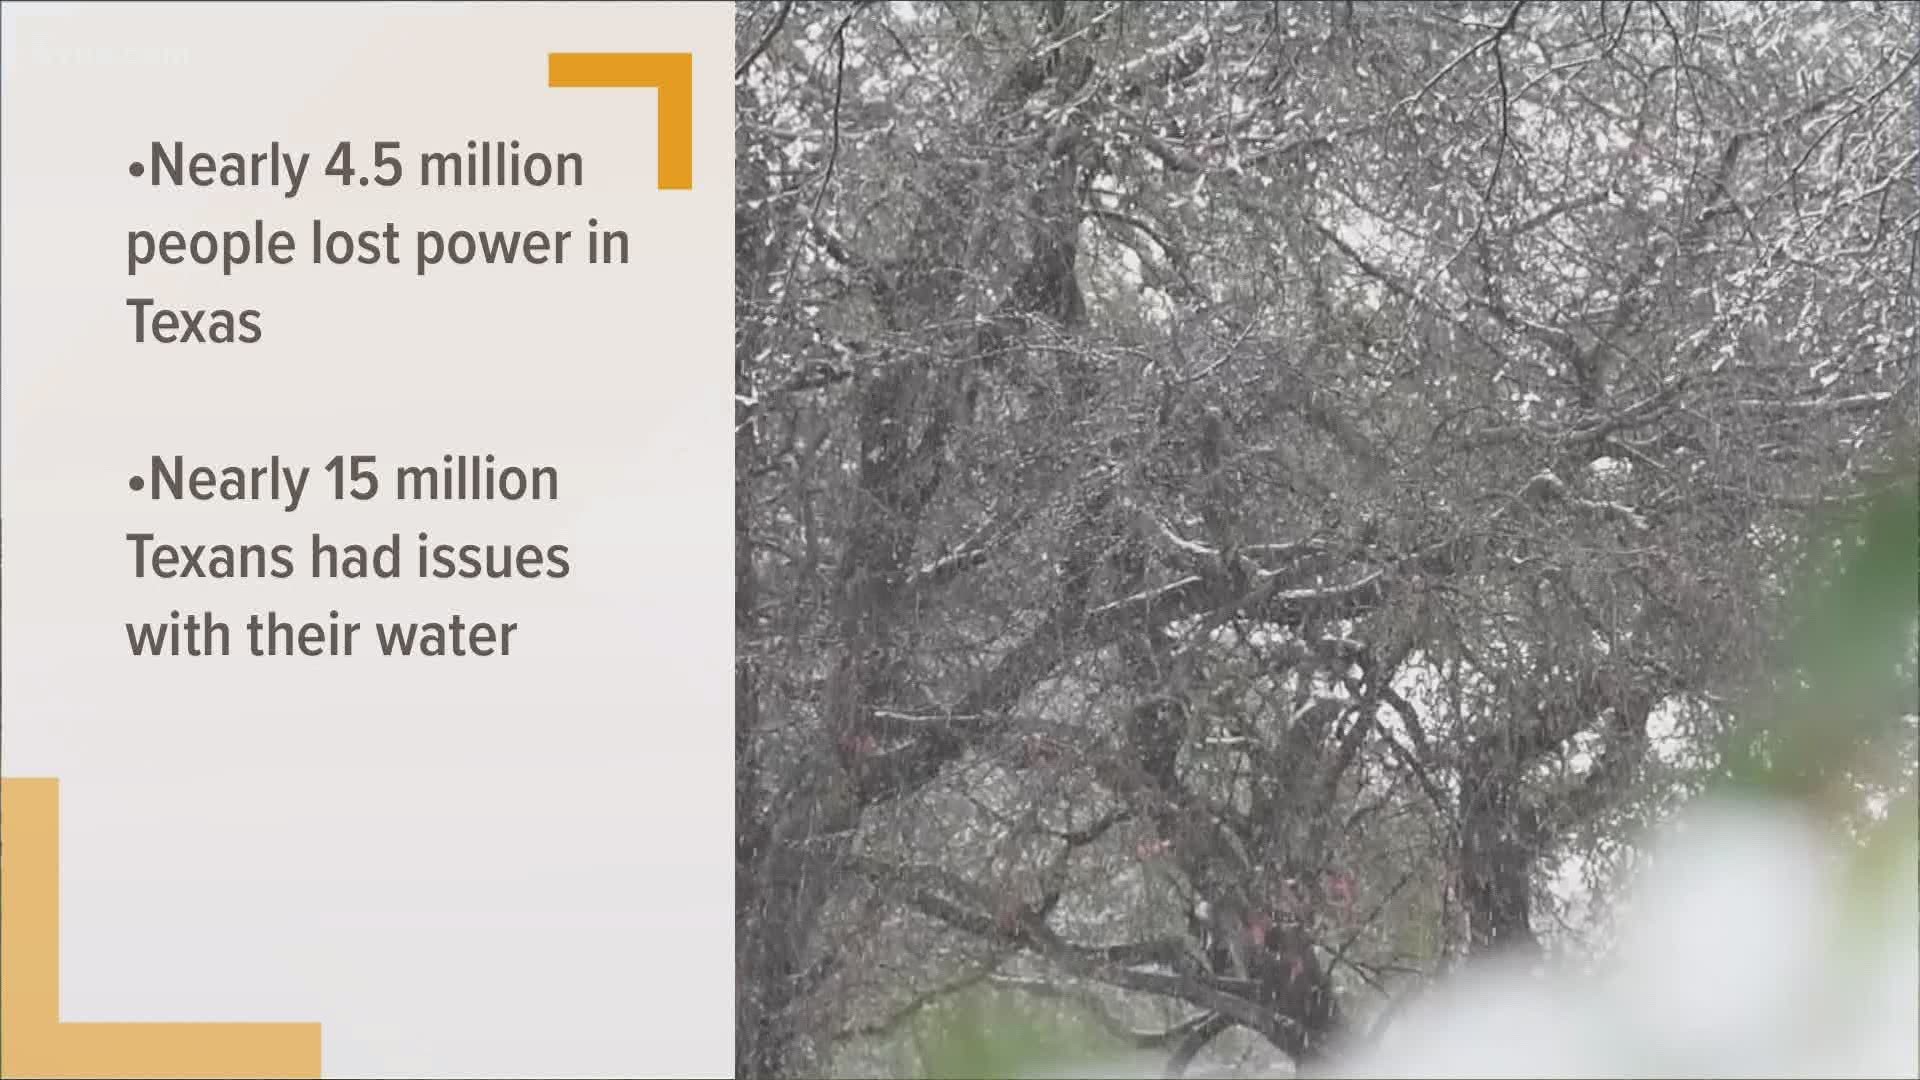 The Texas Legislature will begin hearings for the massive power outages that impacted millions of Texans during the winter storms.